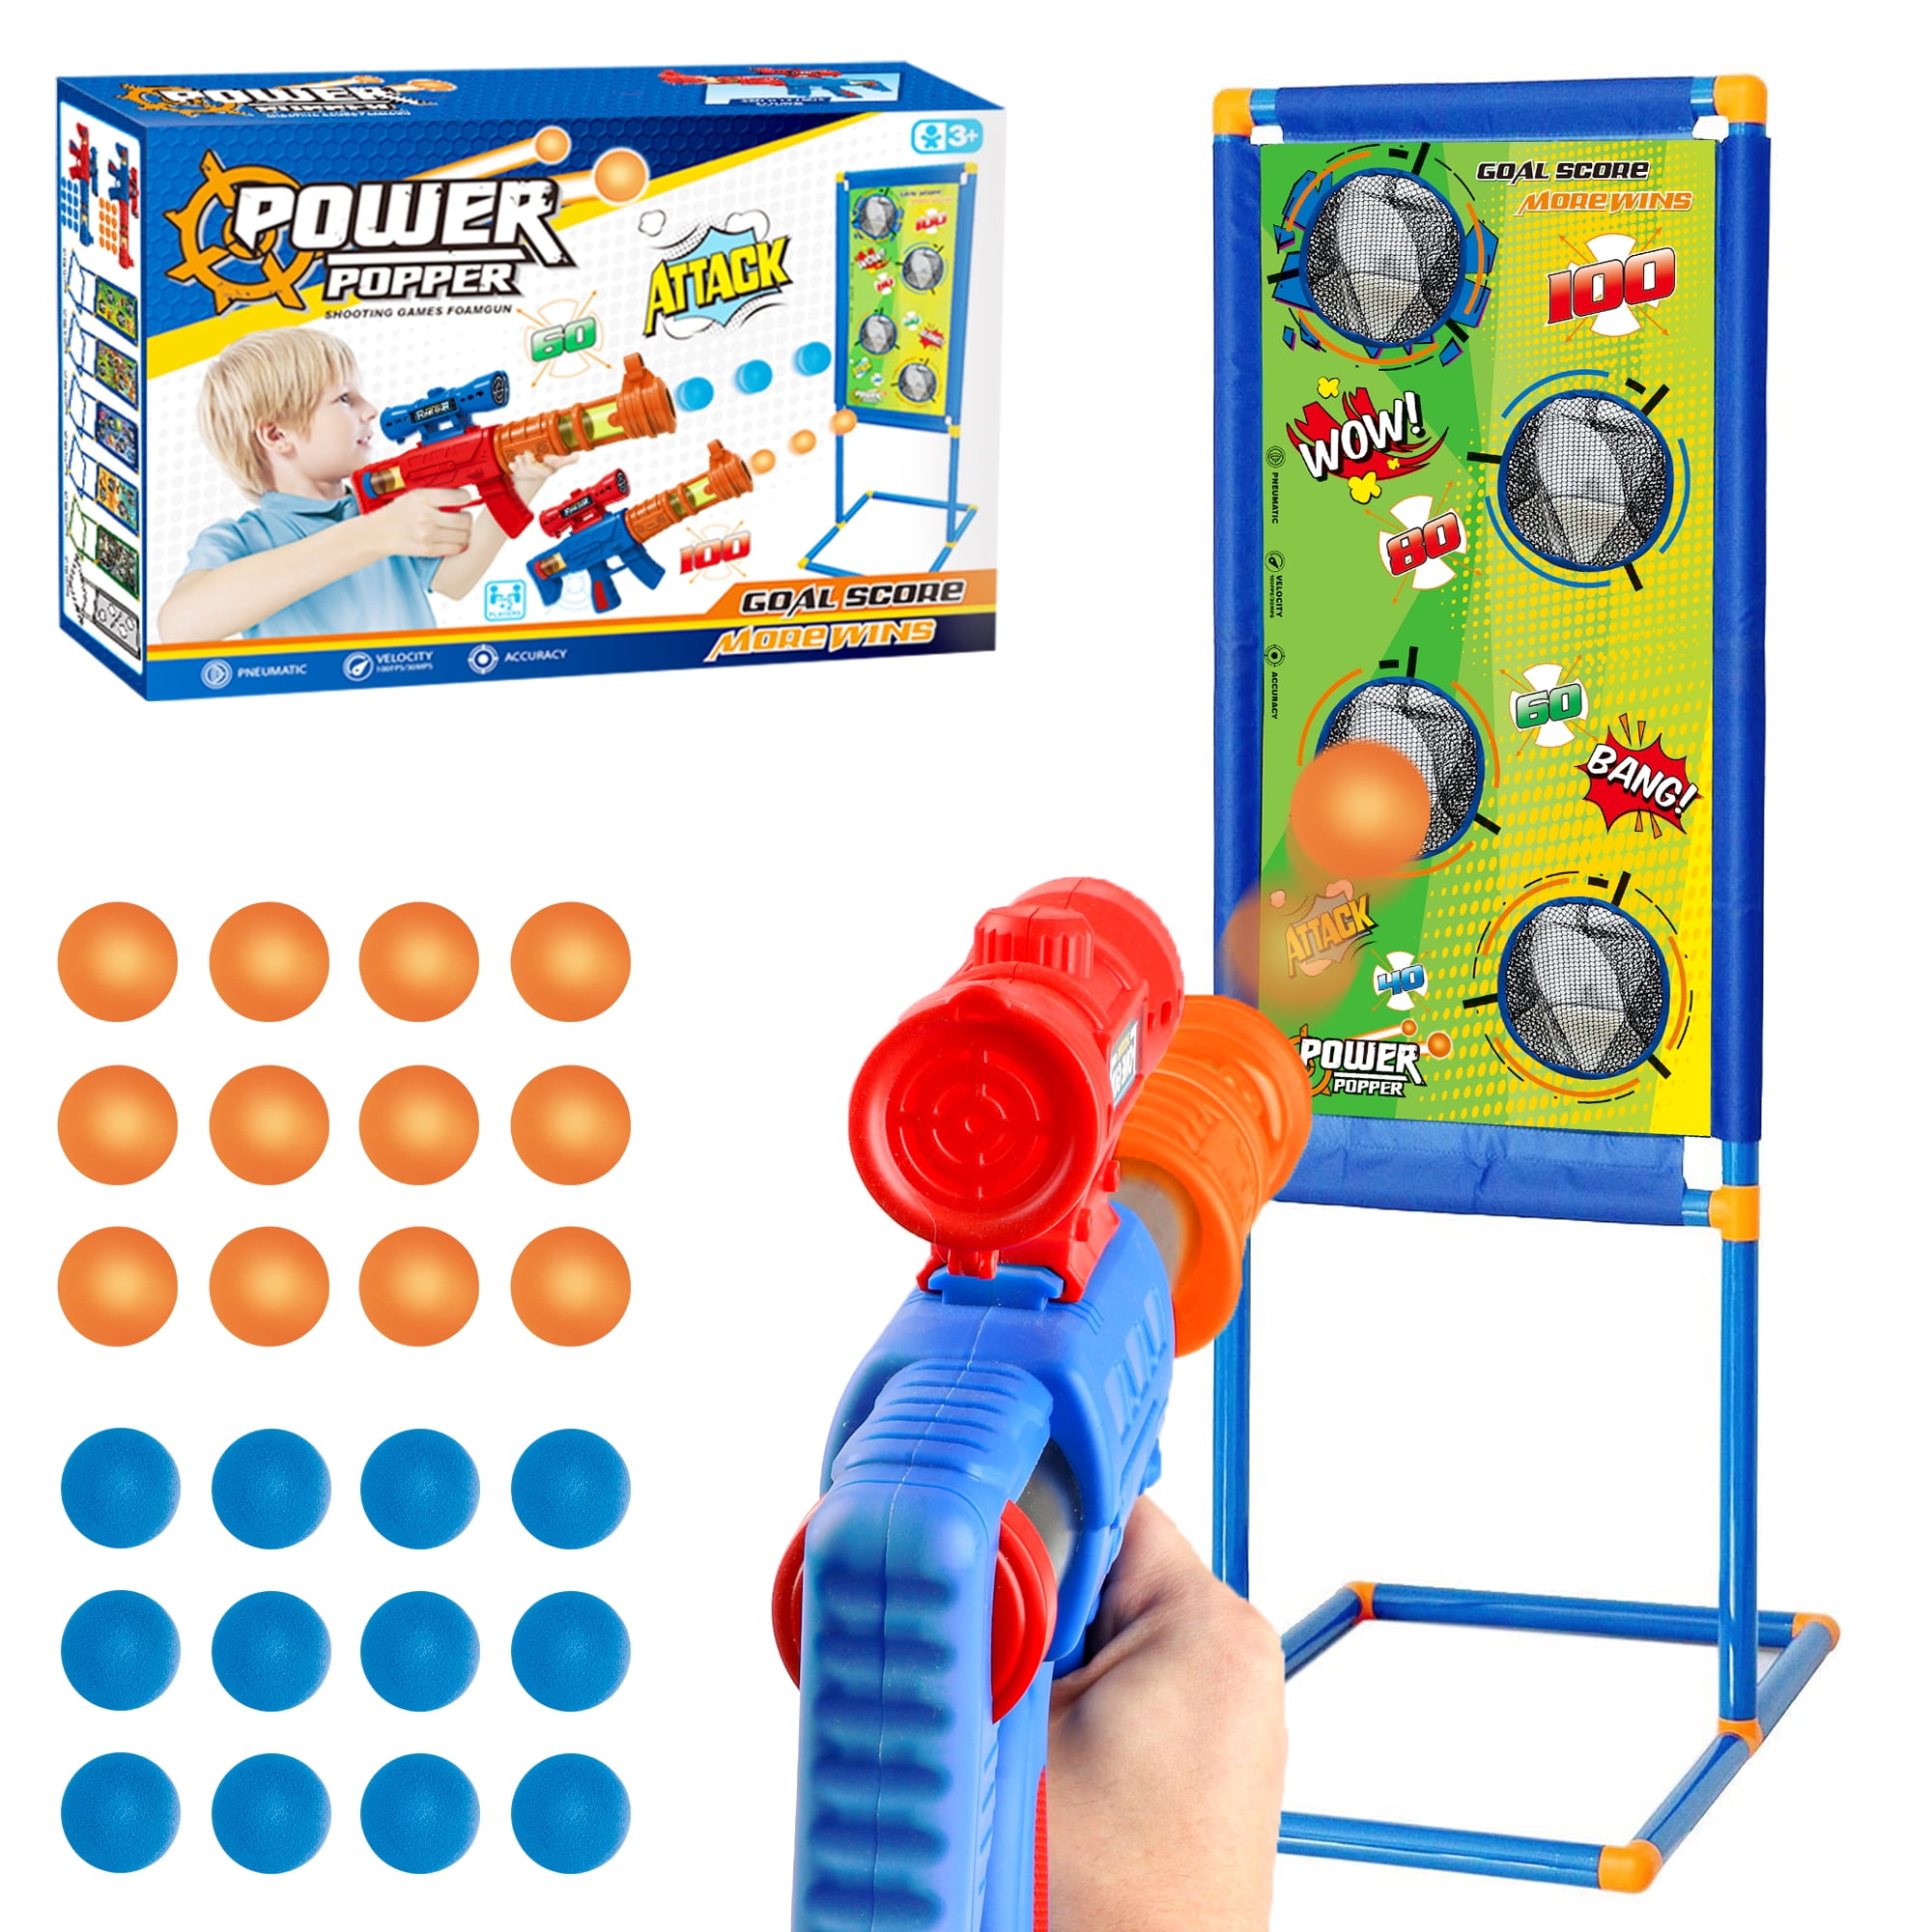 Wishery Shooting Games Nerf Target for Shooting Practice for Kids Shooting targets for Toy Foam Blasters and Gun Games Toys for 5 6 7 8 9 10 Year Old Boys